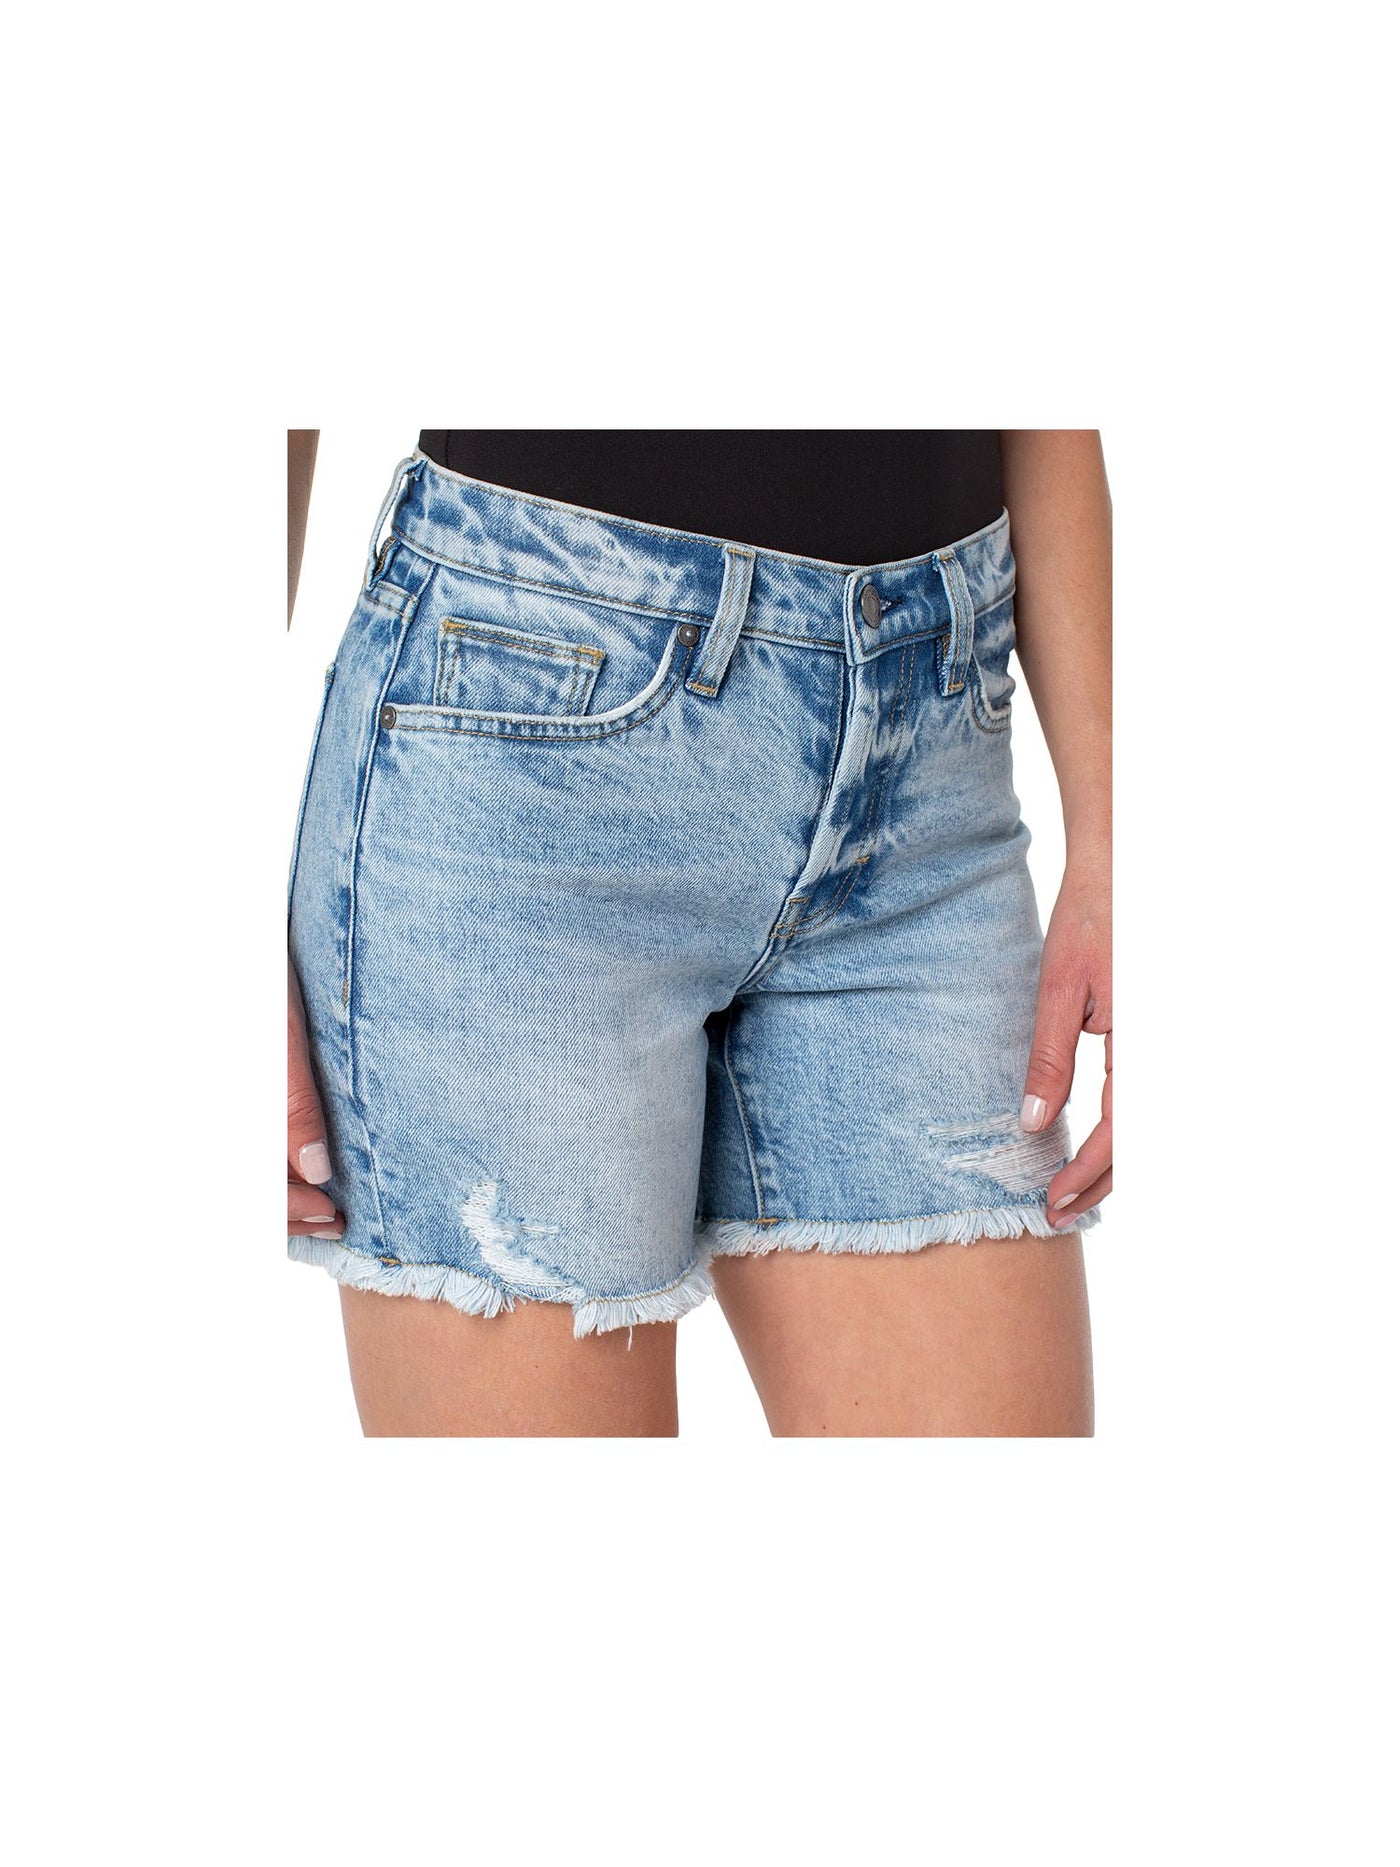 EARNEST SEWN NEW YORK Womens Blue Pocketed Button Fly Frayed Hem Shorts Shorts 30